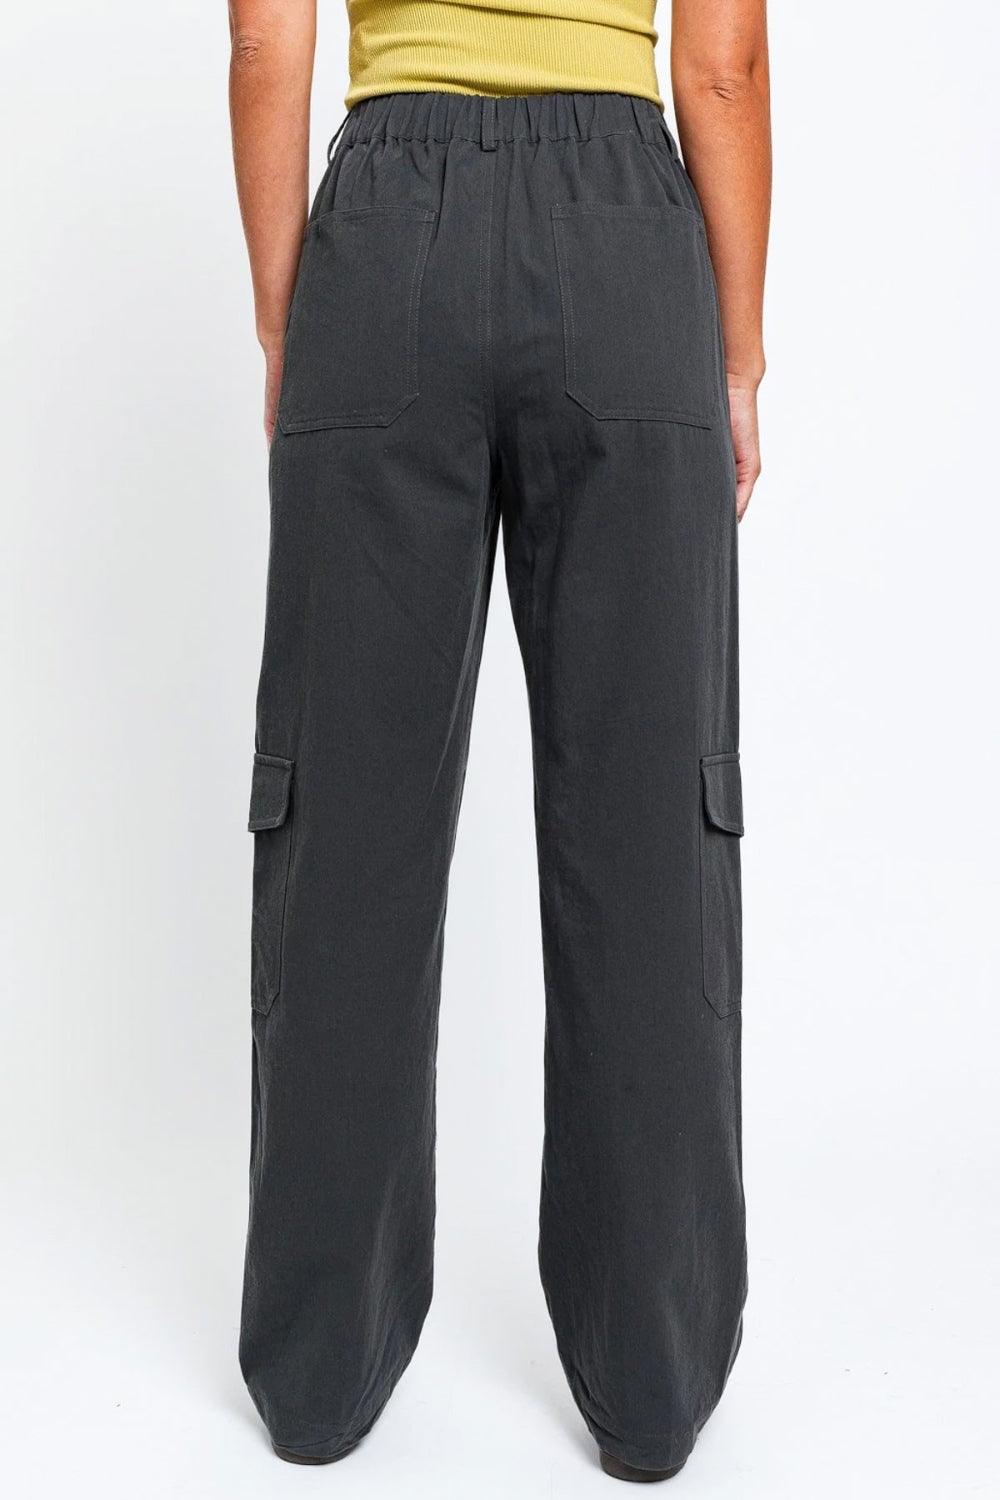 High Waisted Wide Leg Cargo Pants with Pockets - Wildflower Hippies